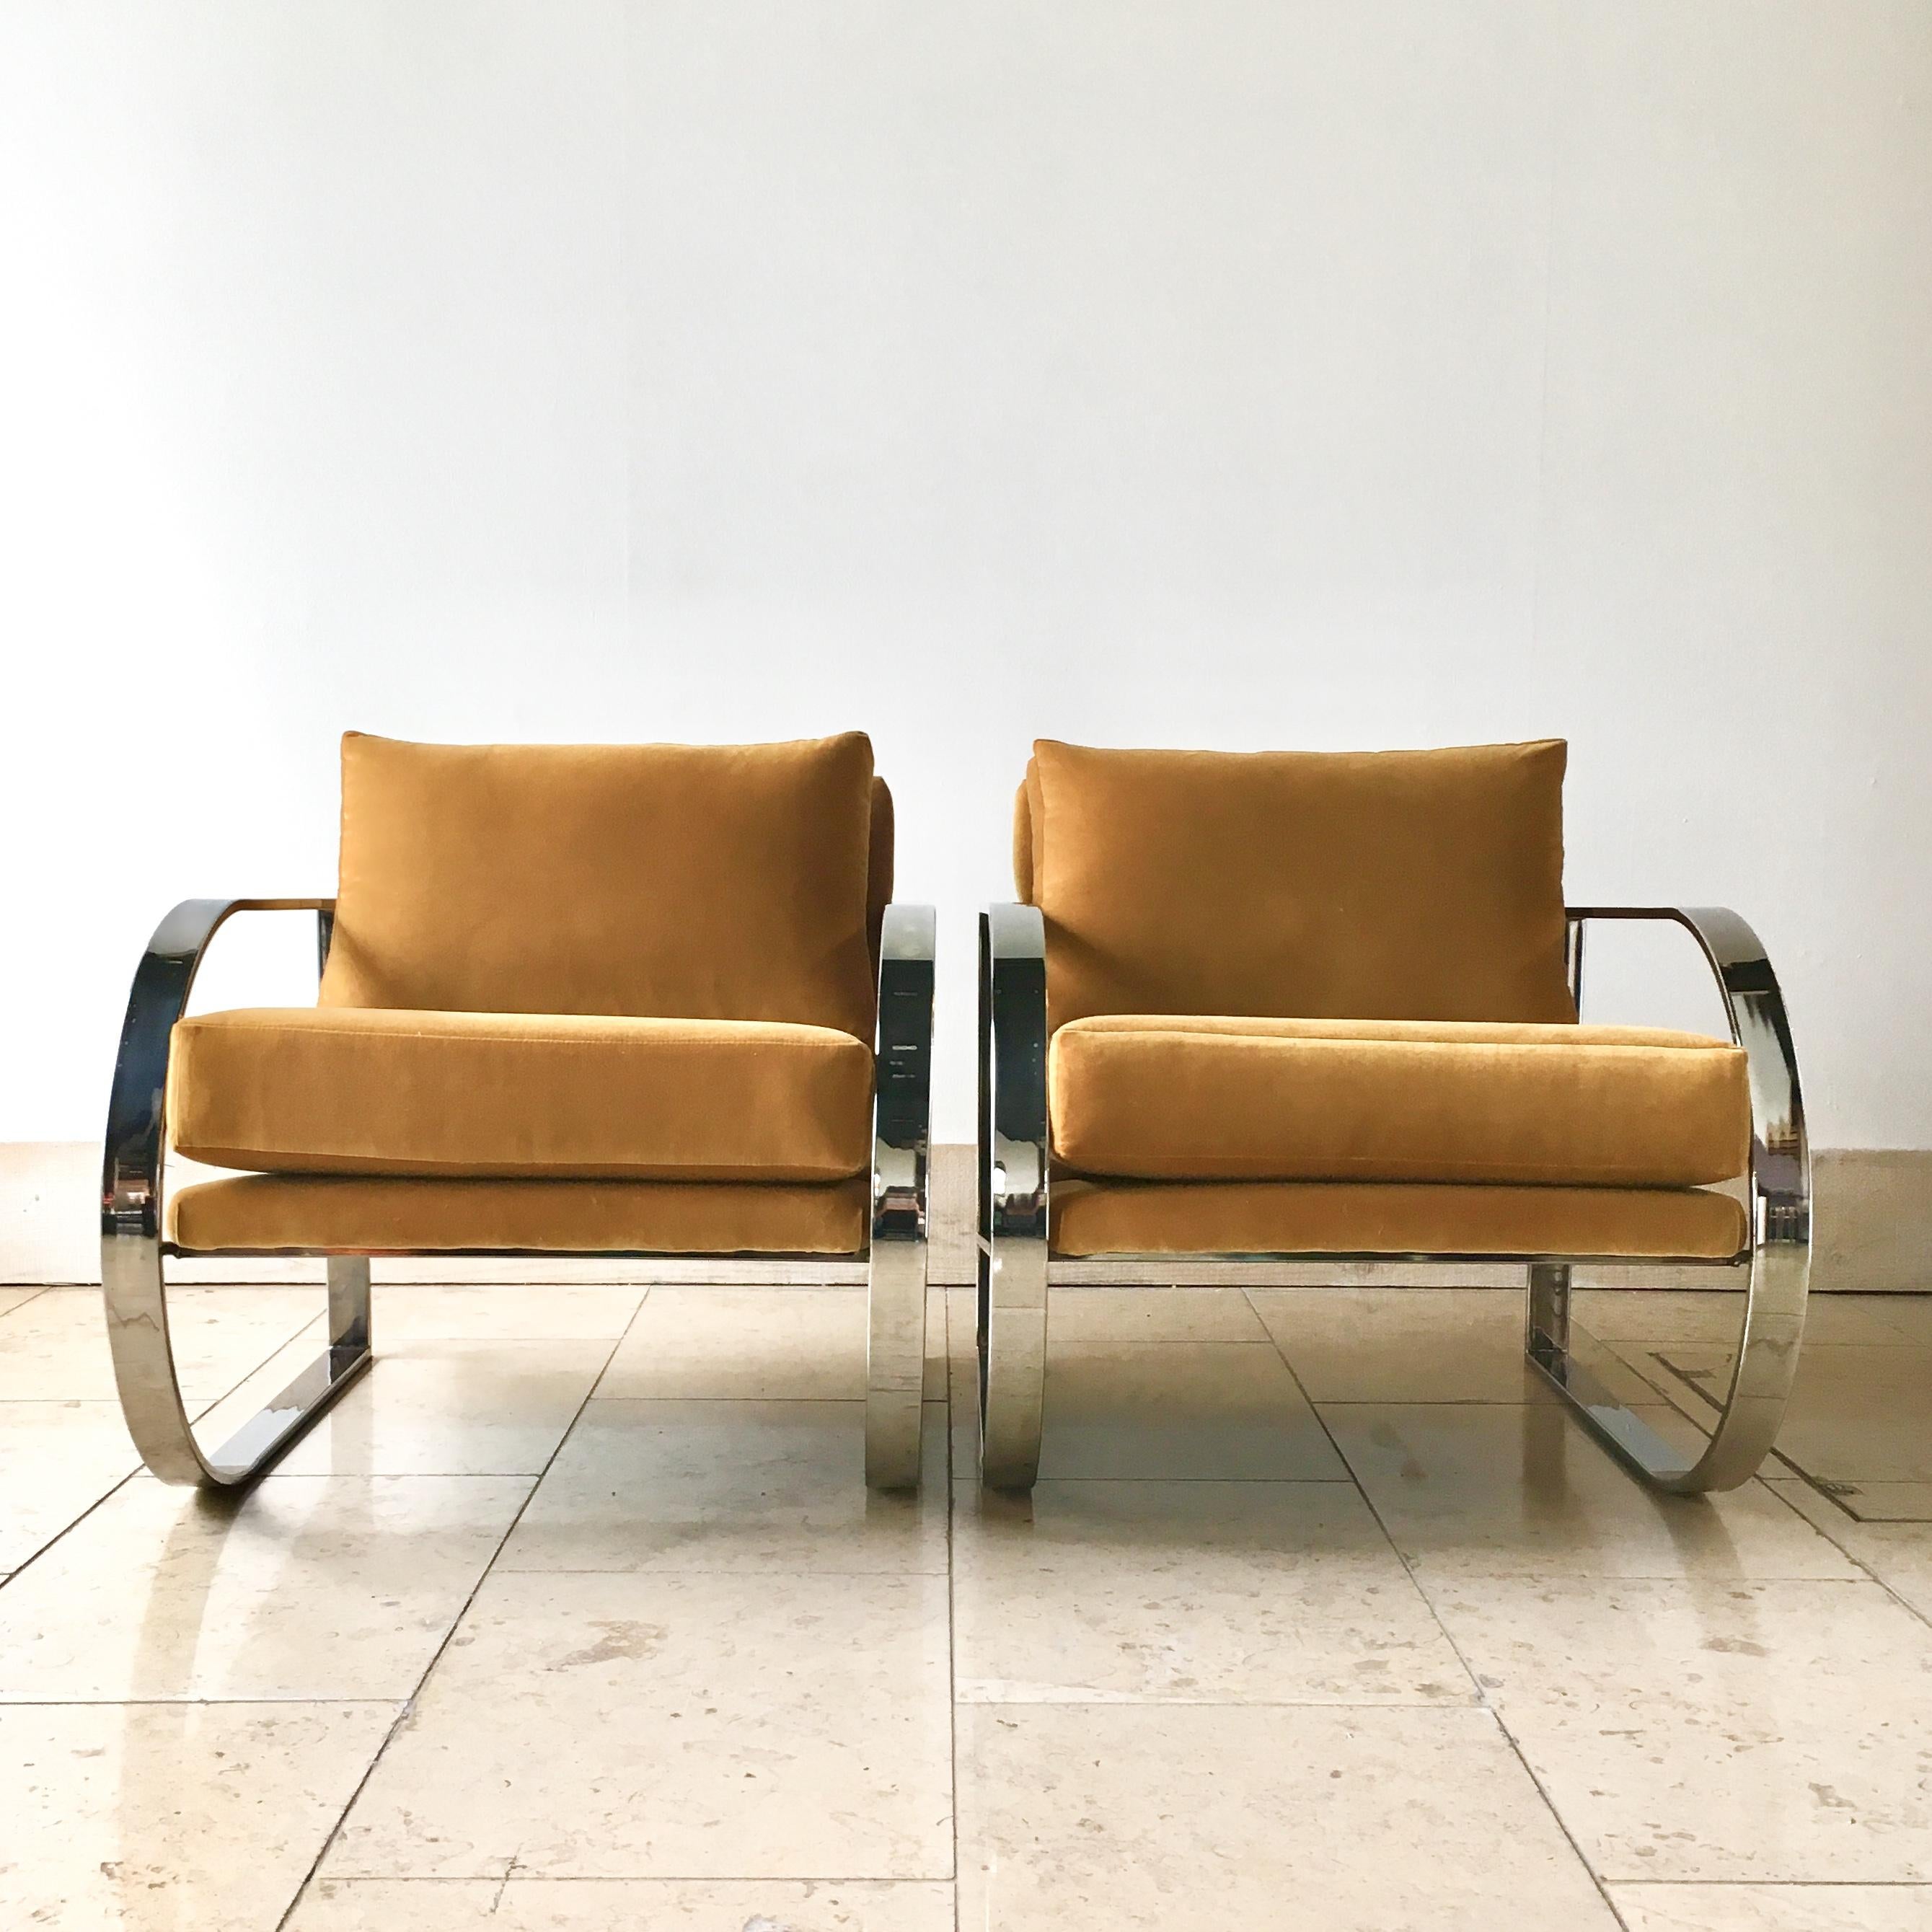 Pair of curved chromium steel framed armchairs upholstered by our team in a mustard coloured velvet. 1970s  
  
